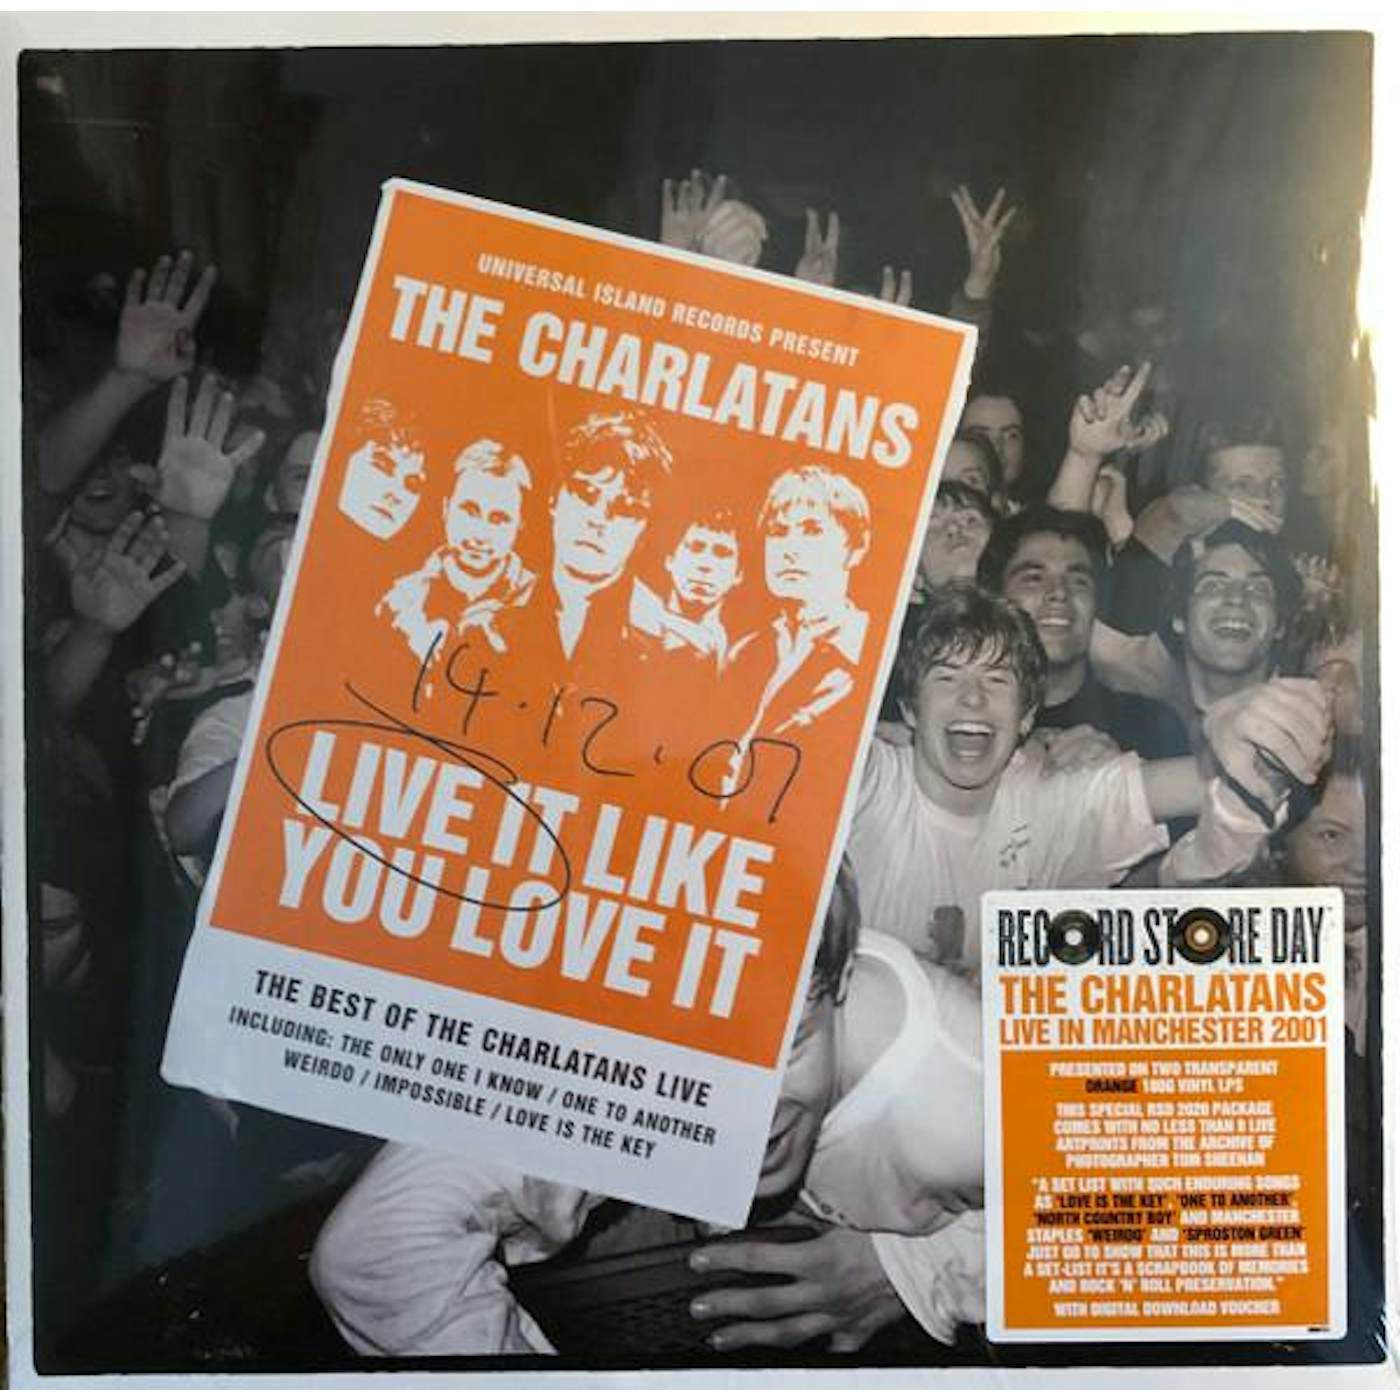 The Charlatans Live It Like You Love It Vinyl Record